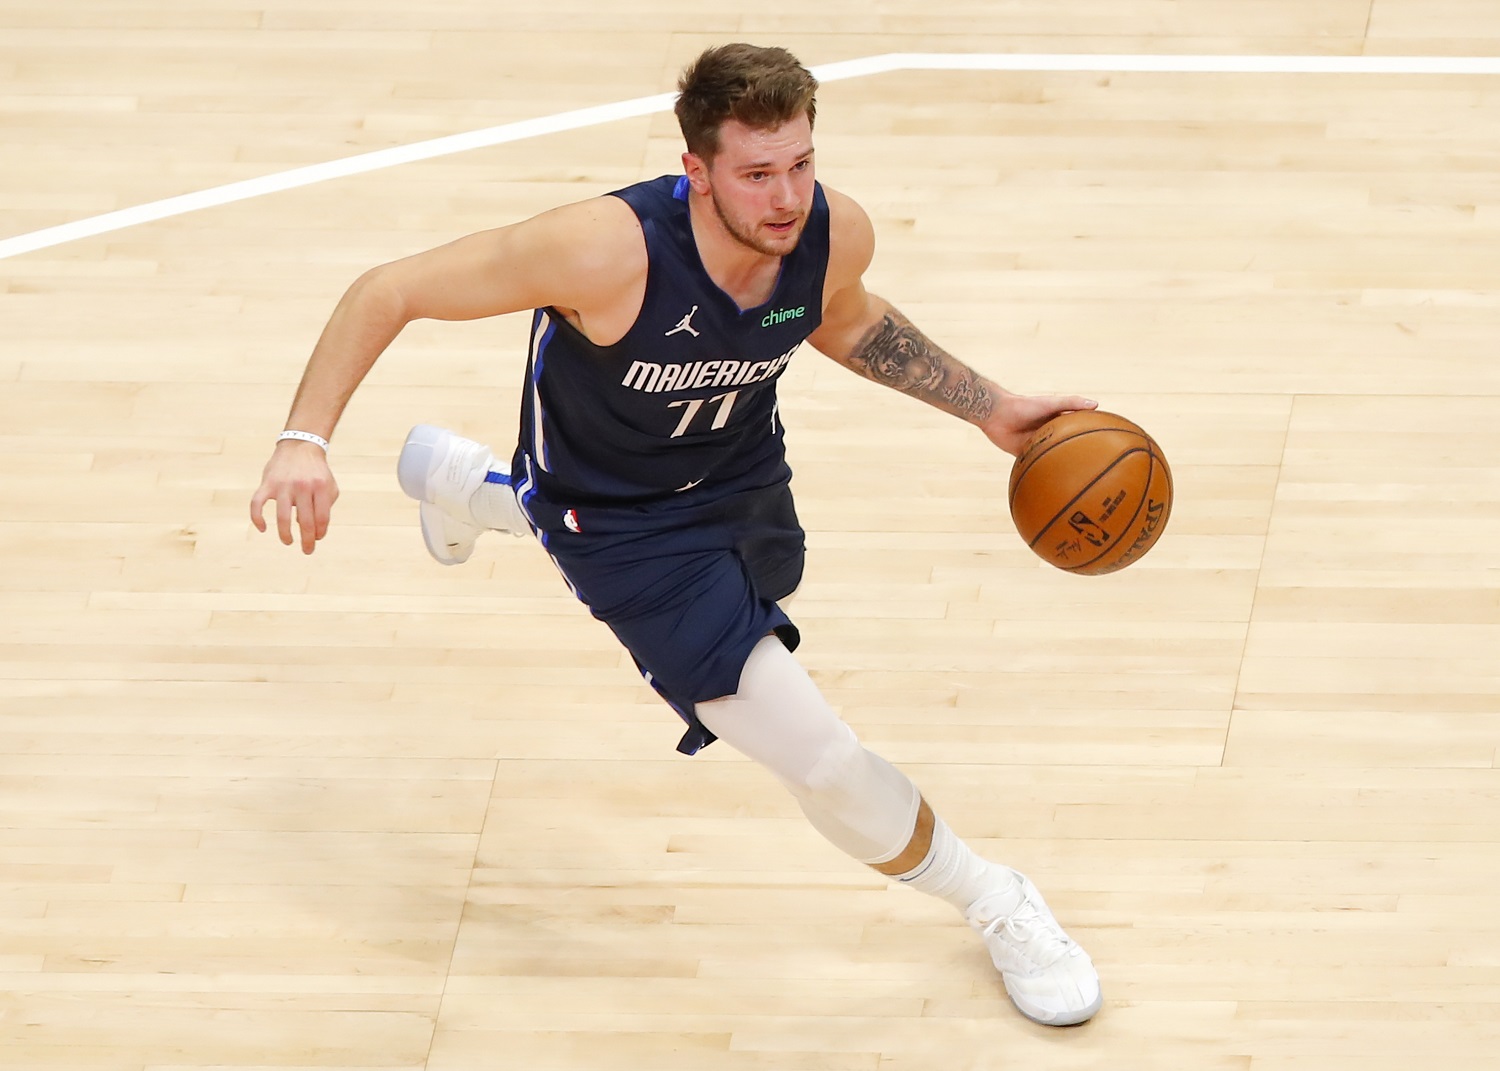 Third-year Dallas Mavericks guard Luka Doncic, frequently compared to Larry Bird, drives to the basket during a February 2021 game.